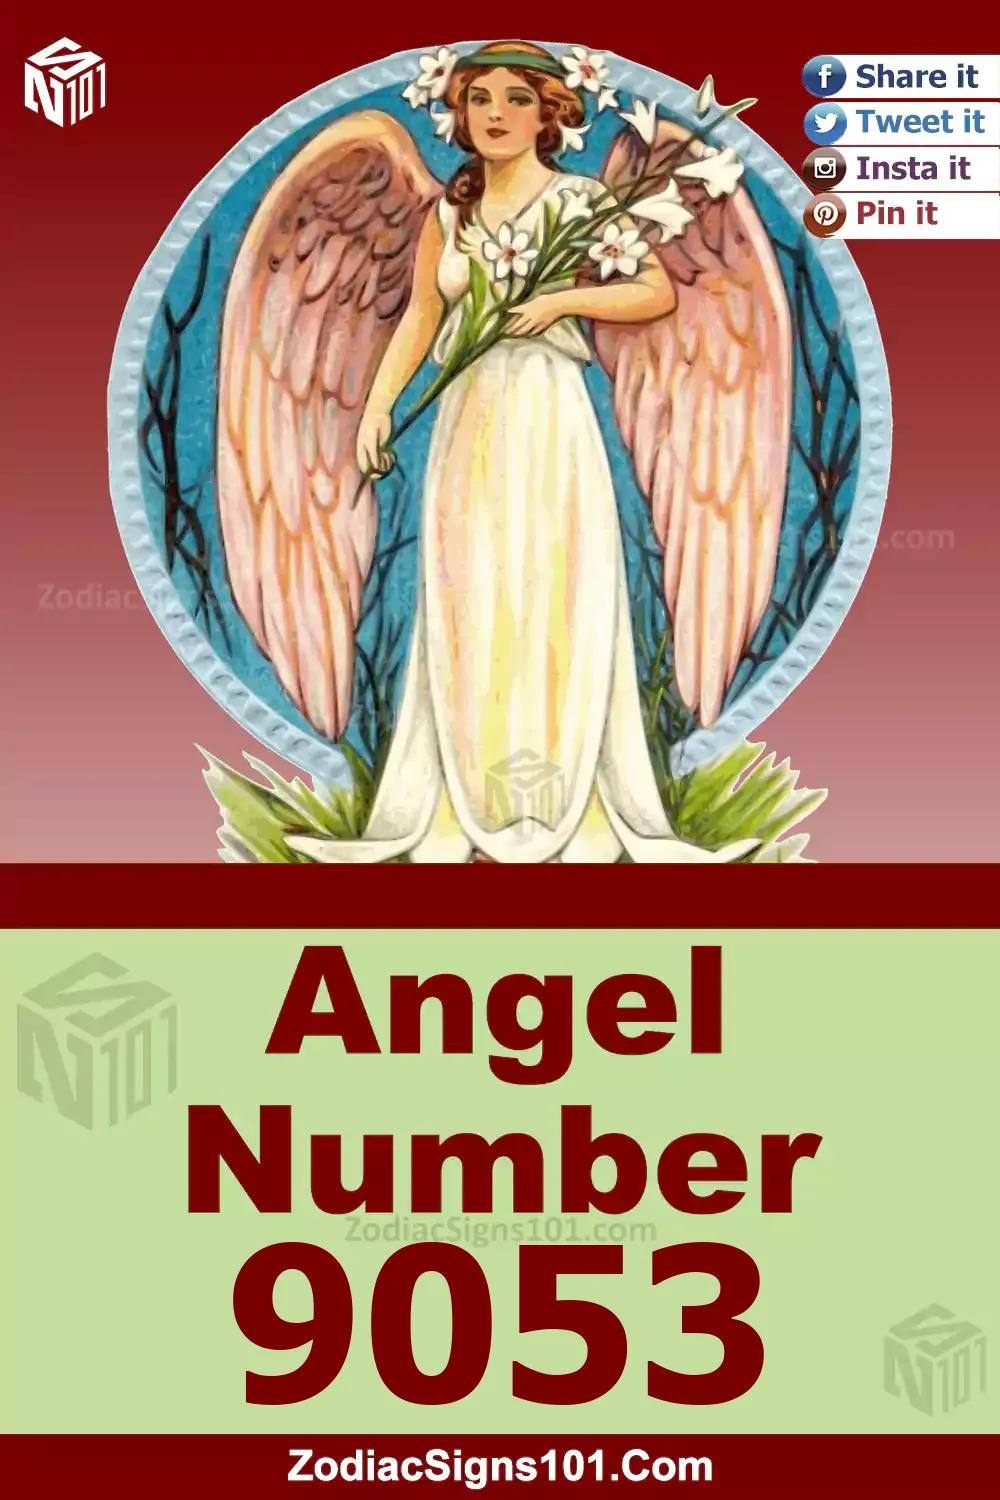 9053 Angel Number Meaning